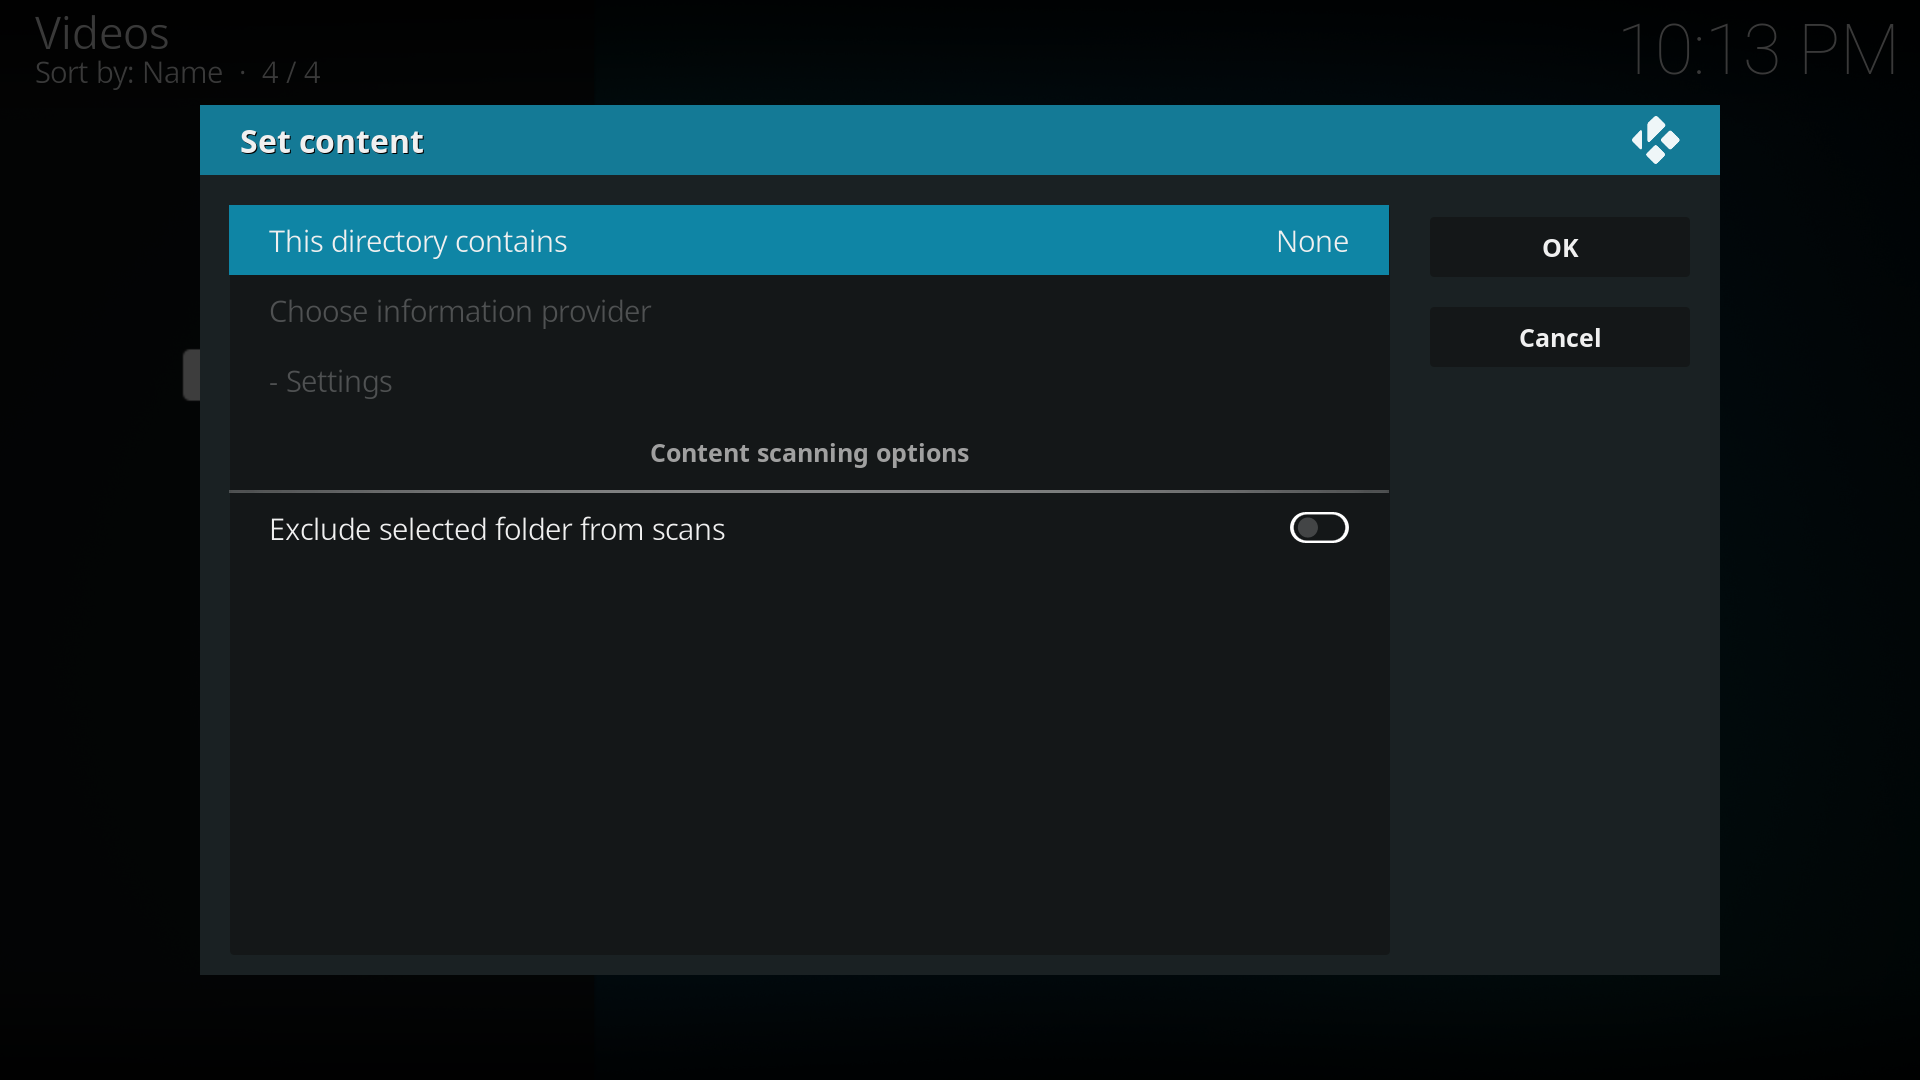 Step 6: The set content window will display, this is where you tell XBMC what type of media is in the folder. Press the down arrow until you reach the correct type (in this example movies)